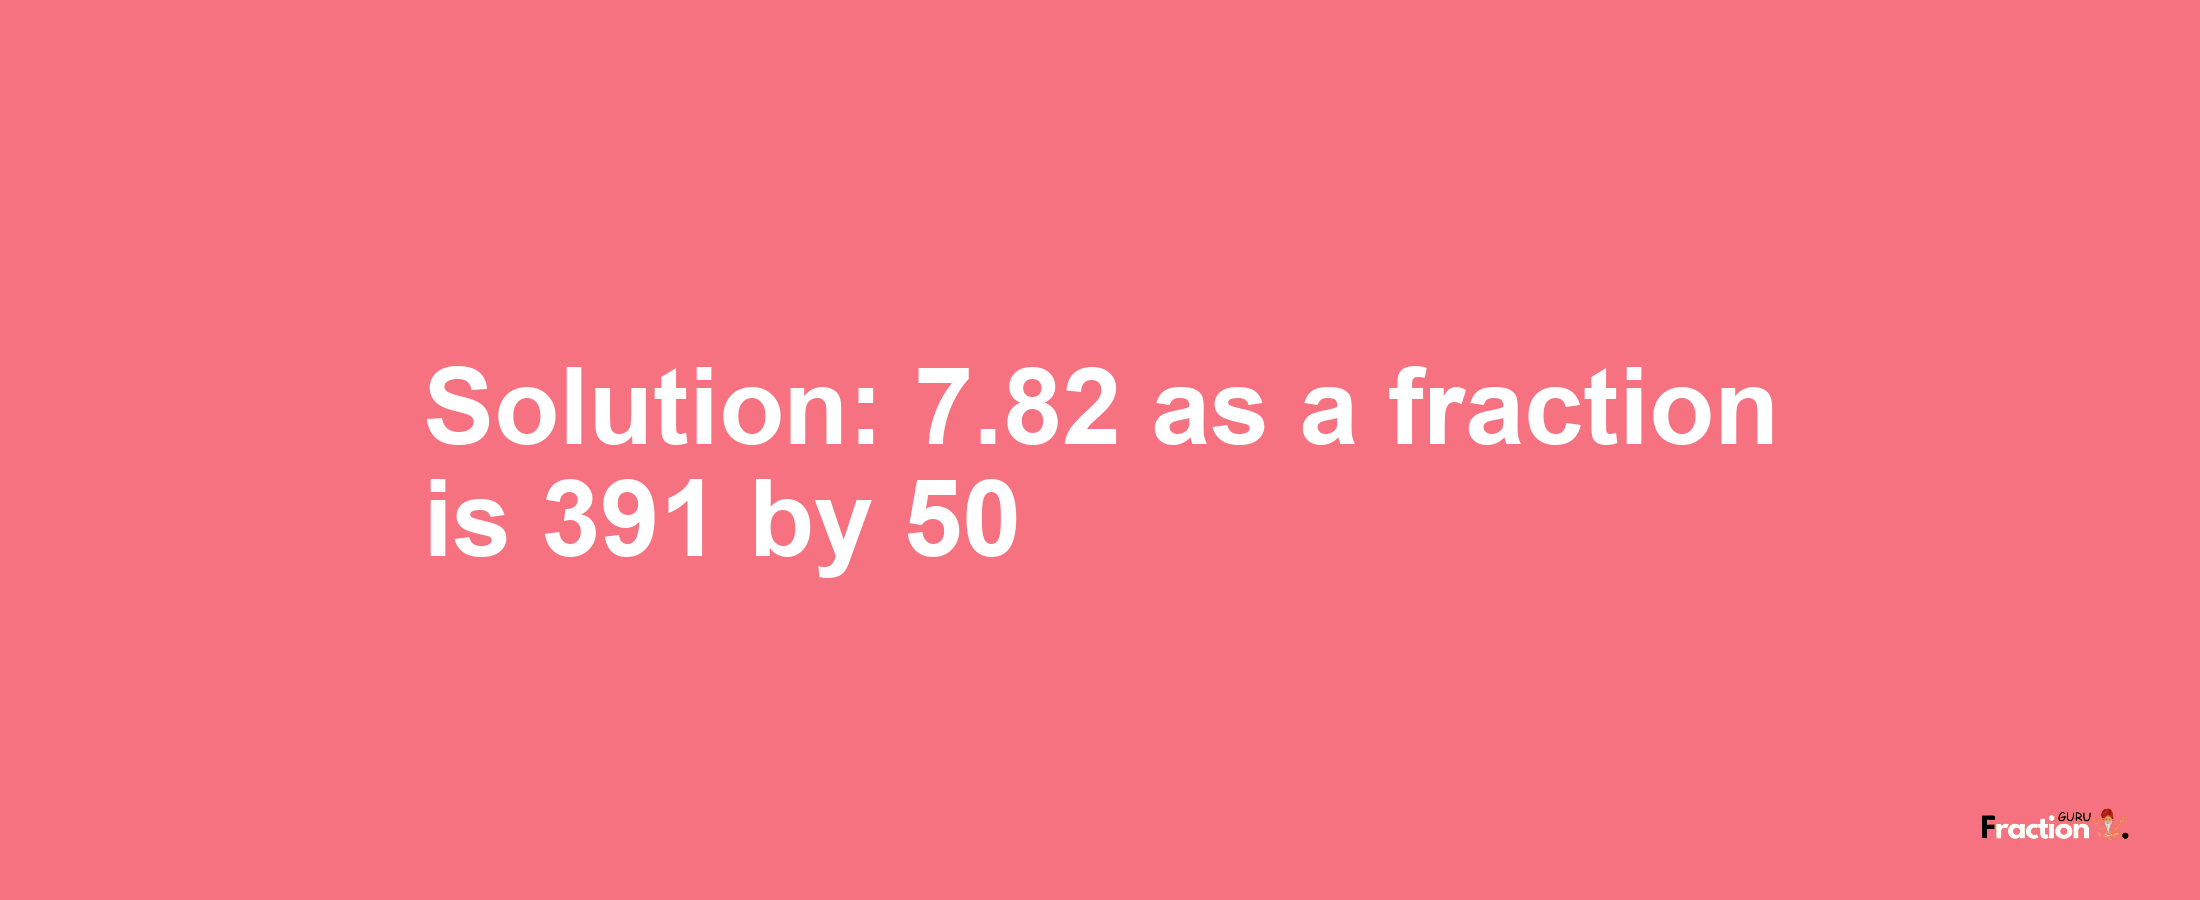 Solution:7.82 as a fraction is 391/50